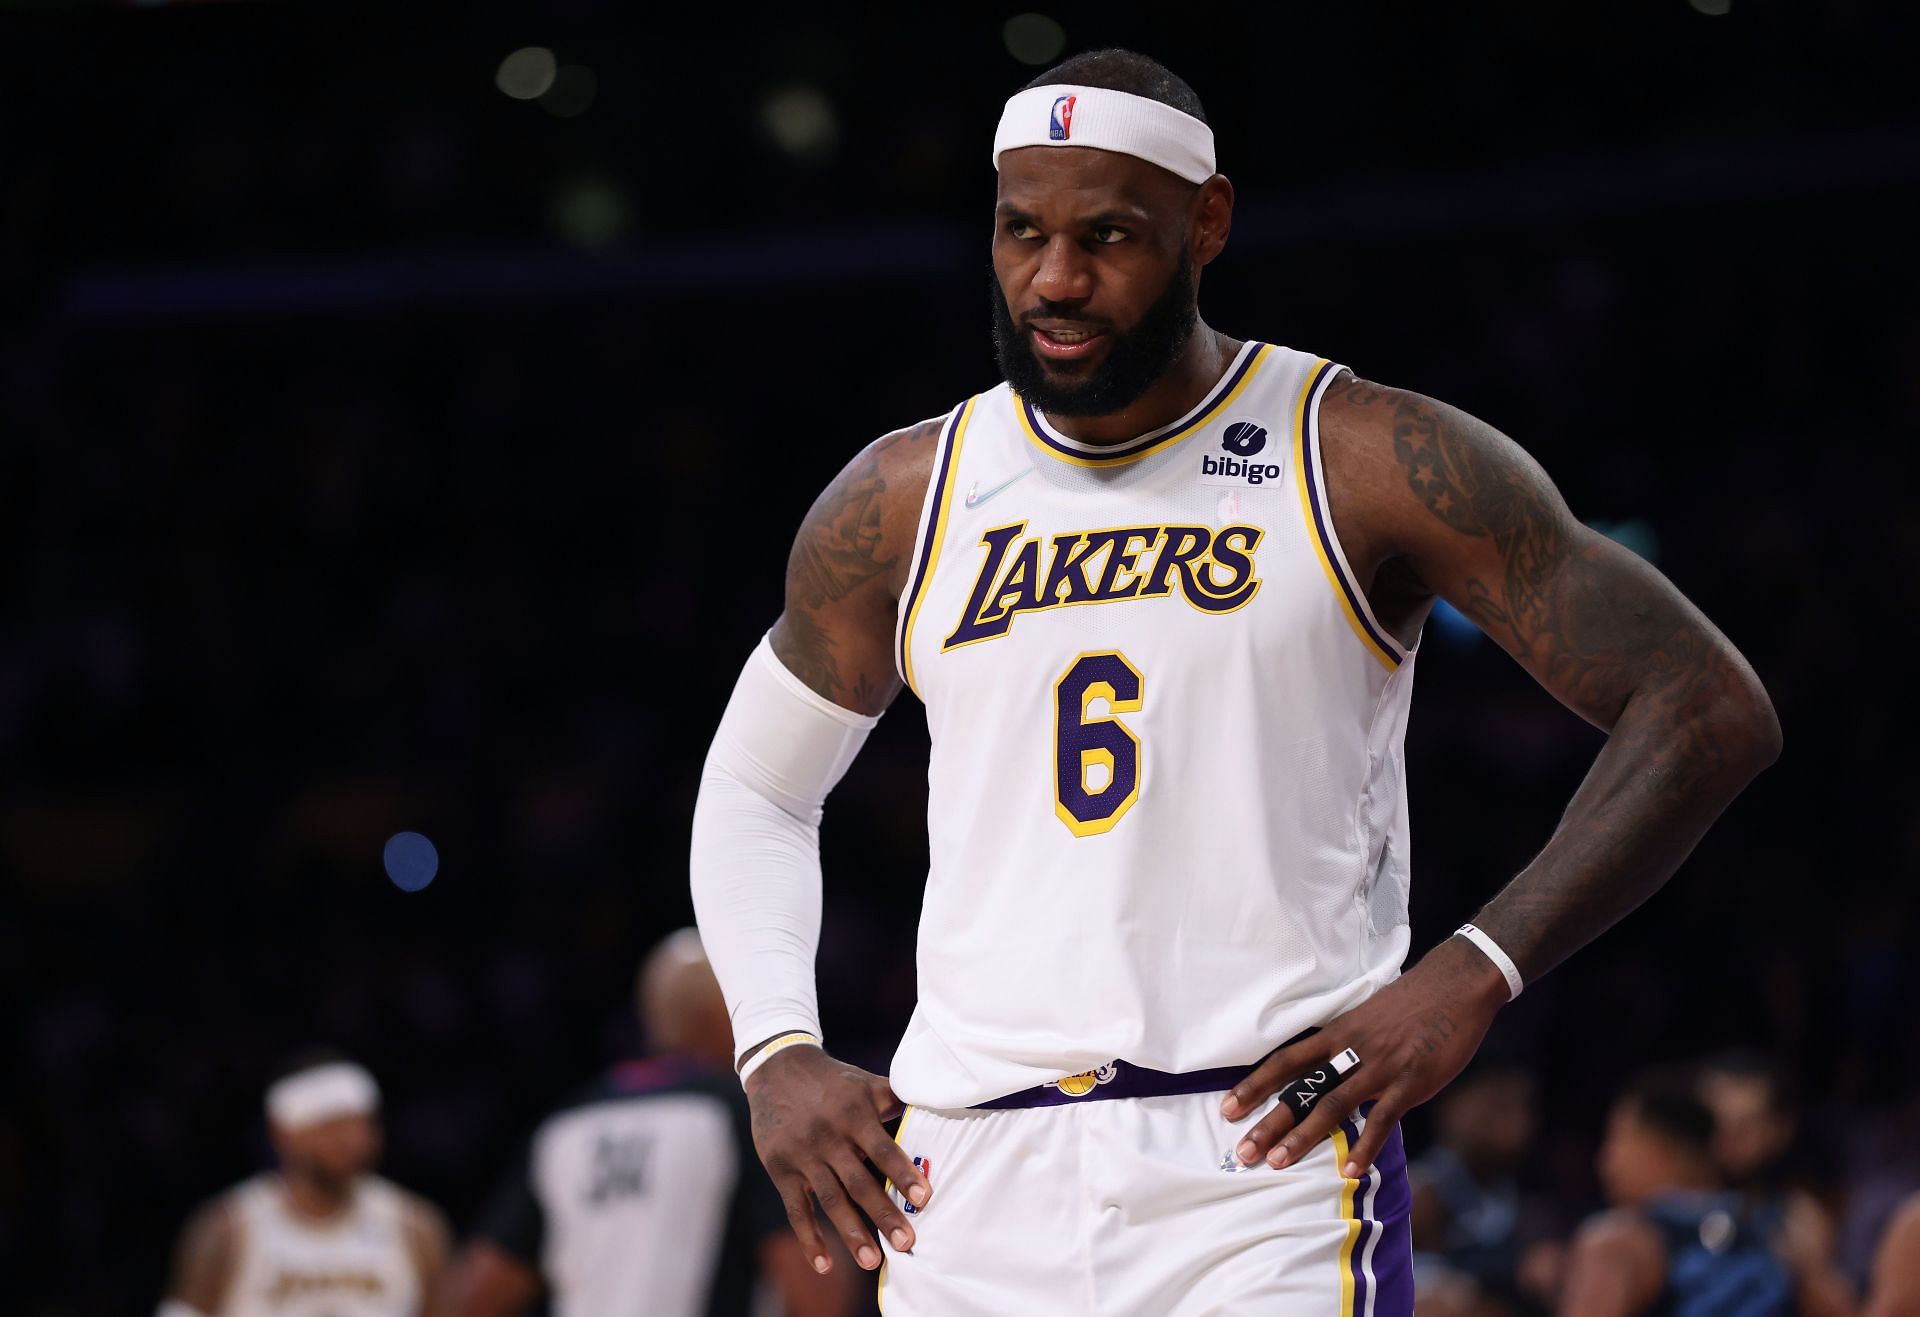 LeBron James during the Memphis Grizzlies v Los Angeles Lakers game